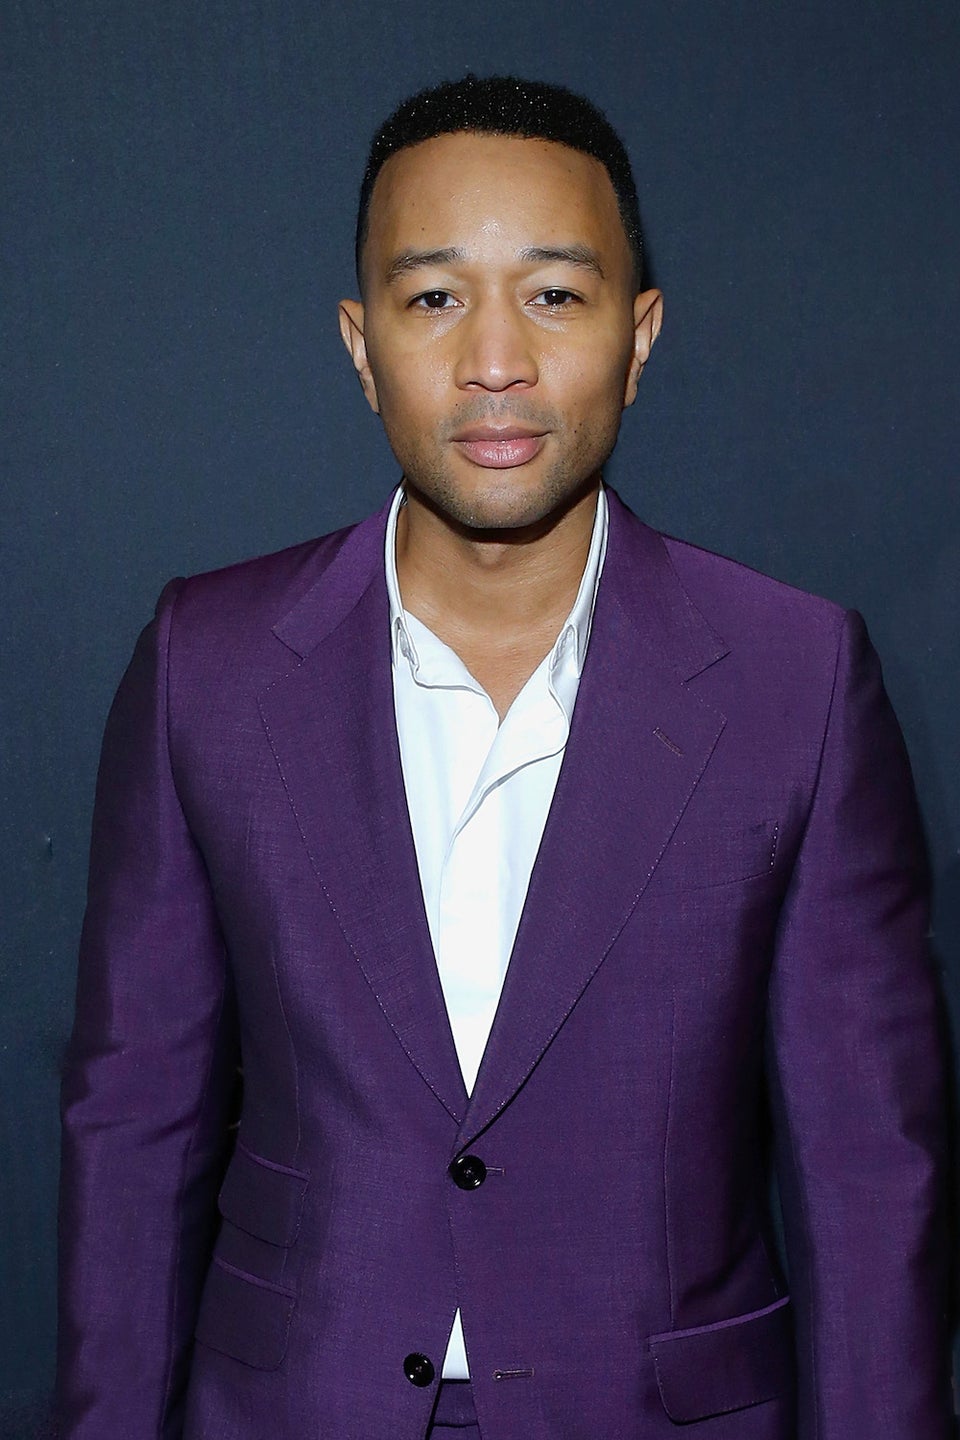 John Legend Calls Out Louisiana For Its White Supremacist Policies: ‘Reject Prejudice In All Its Forms’